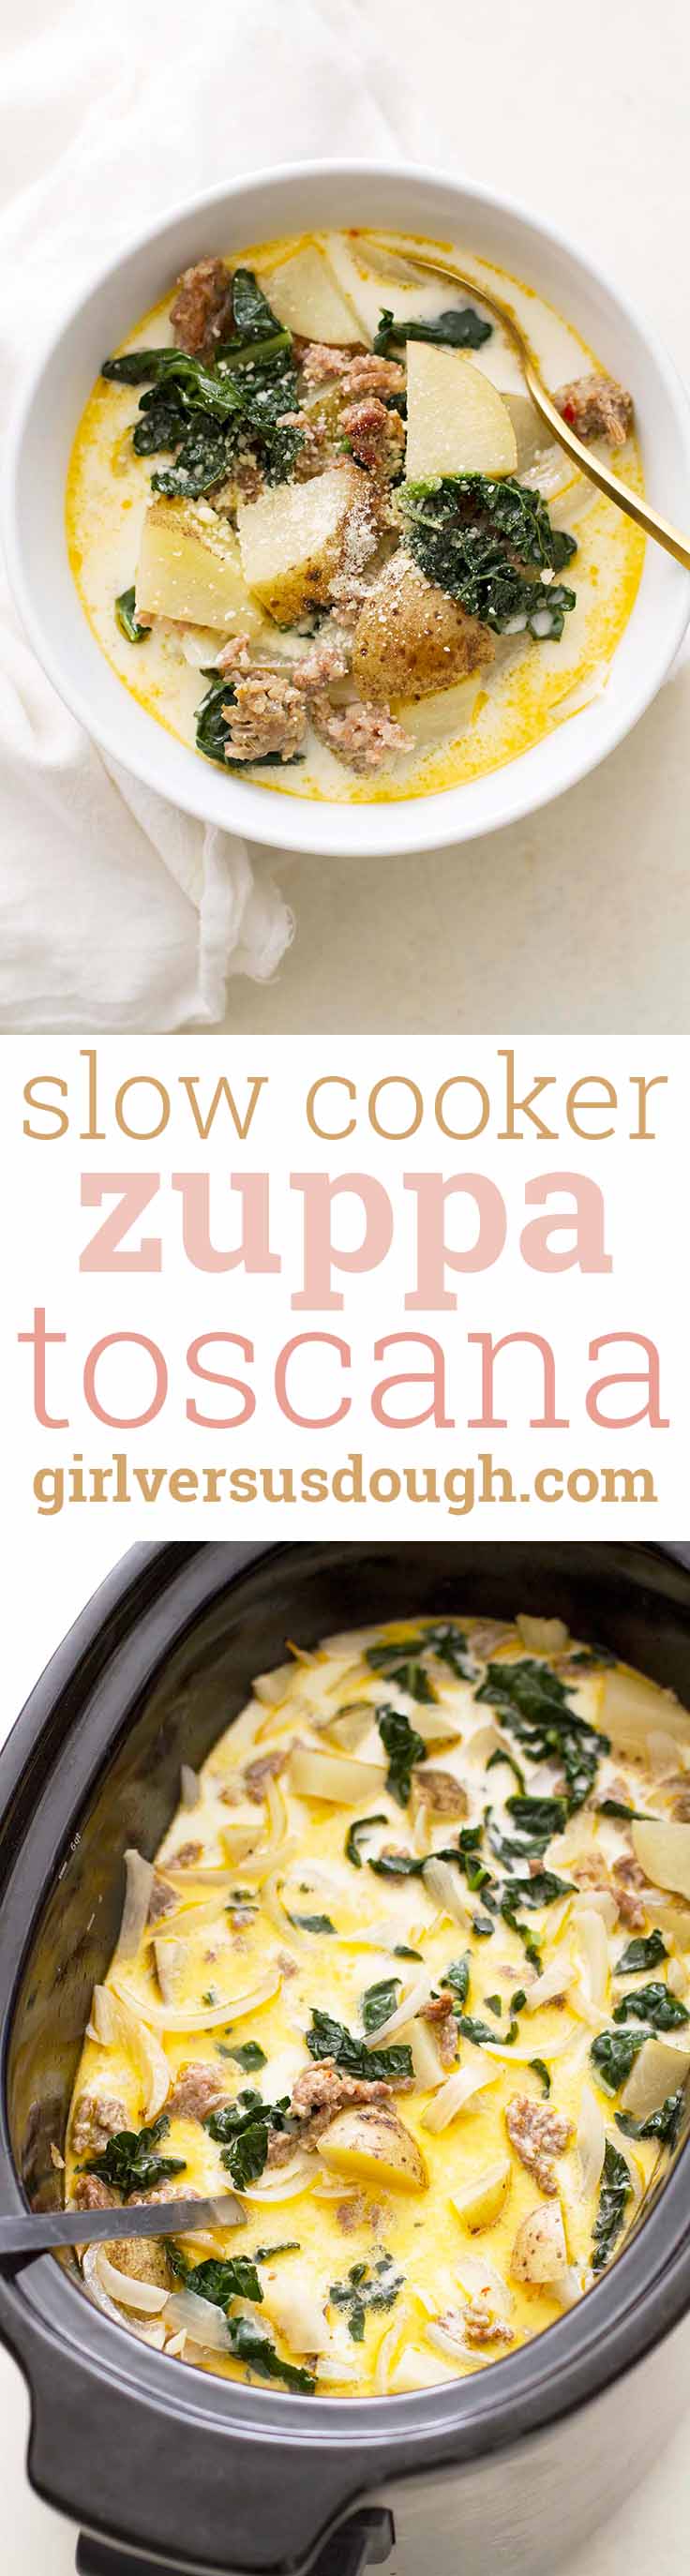 Slow Cooker Zuppa Toscana -- break out the crock pot for this comfort food! A simple and satisfying soup made in the slow cooker with Italian sausage, potatoes, kale and cream. girlversusdough.com @girlversusdough